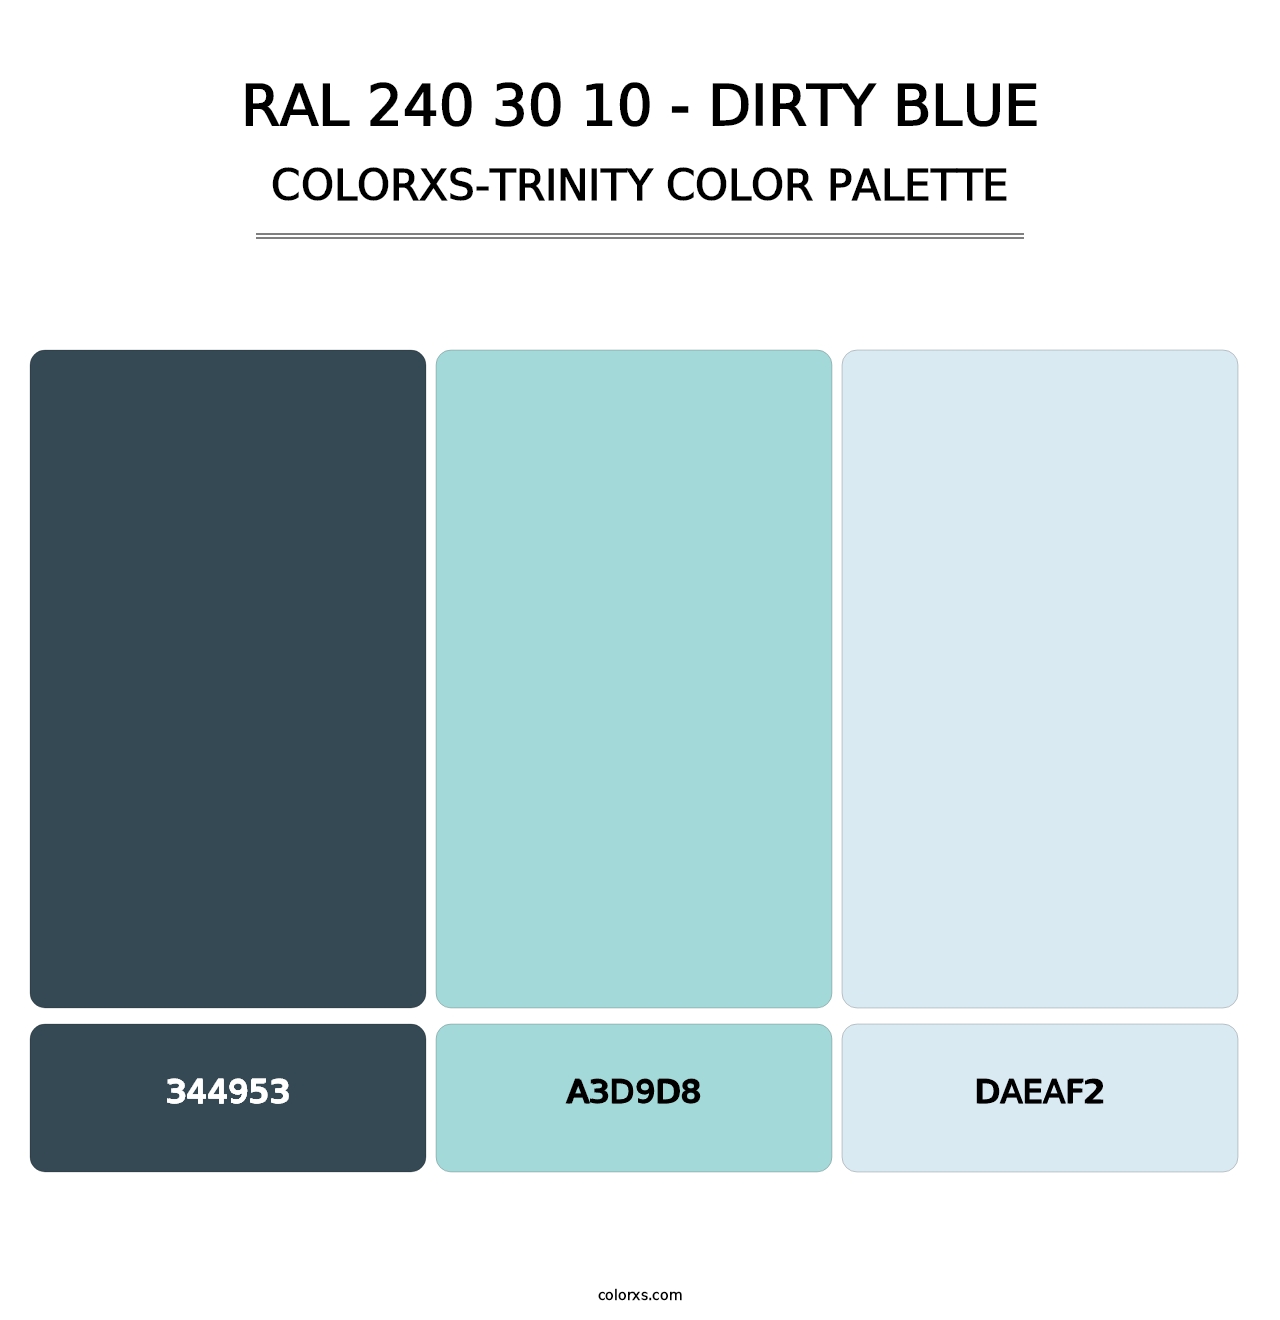 RAL 240 30 10 - Dirty Blue - Colorxs Trinity Palette